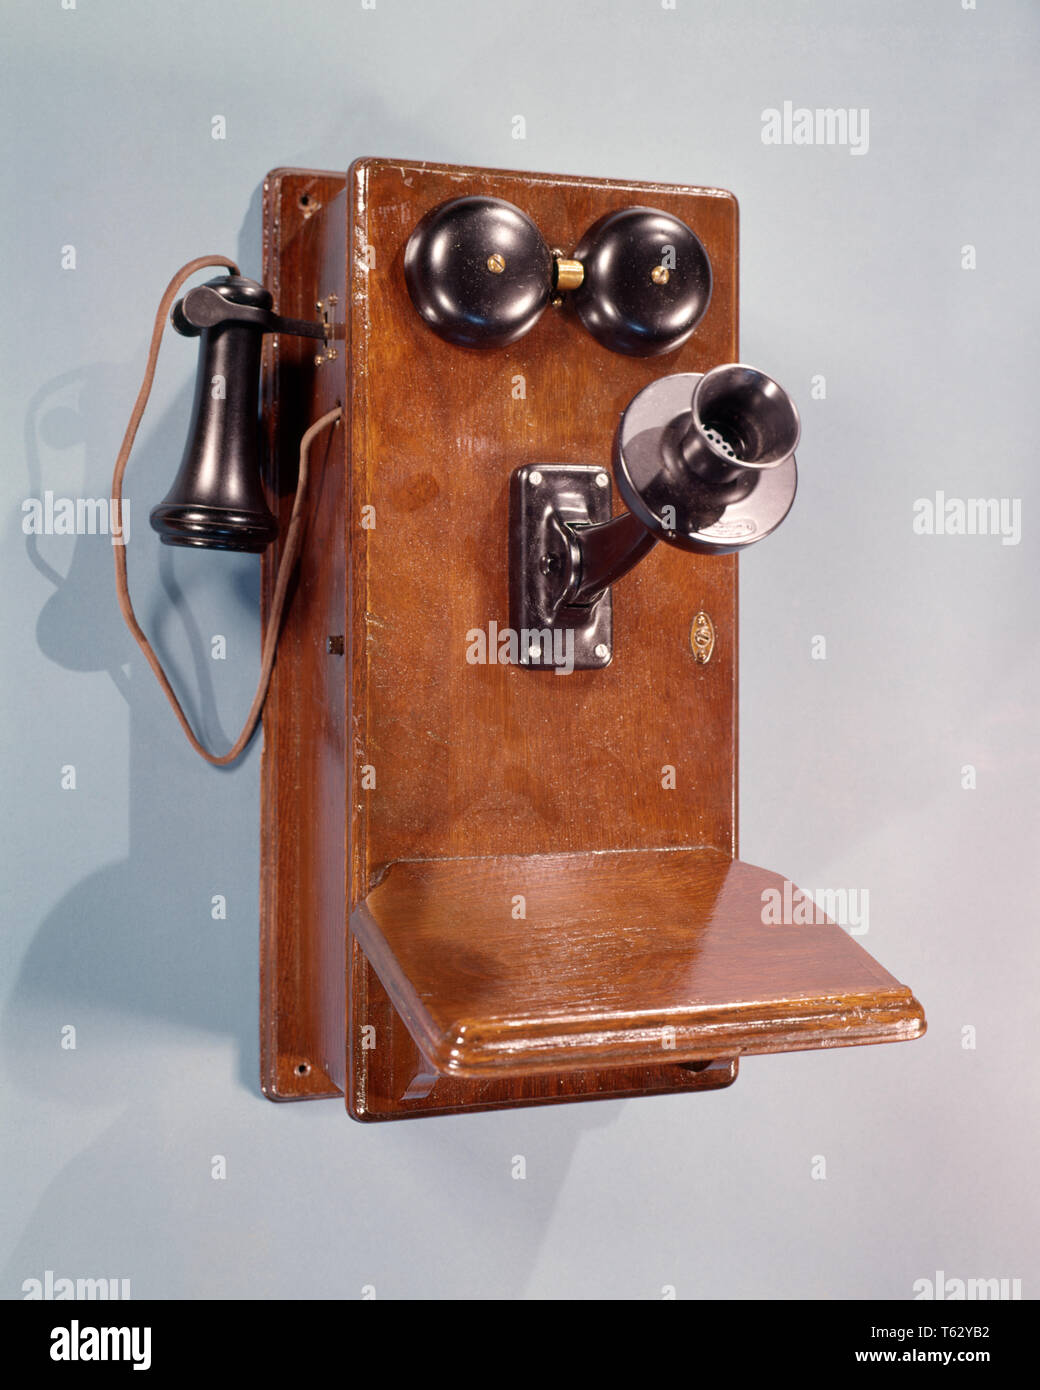 Unusual Telephone Part 1907-1914 Western Electric Ringer 